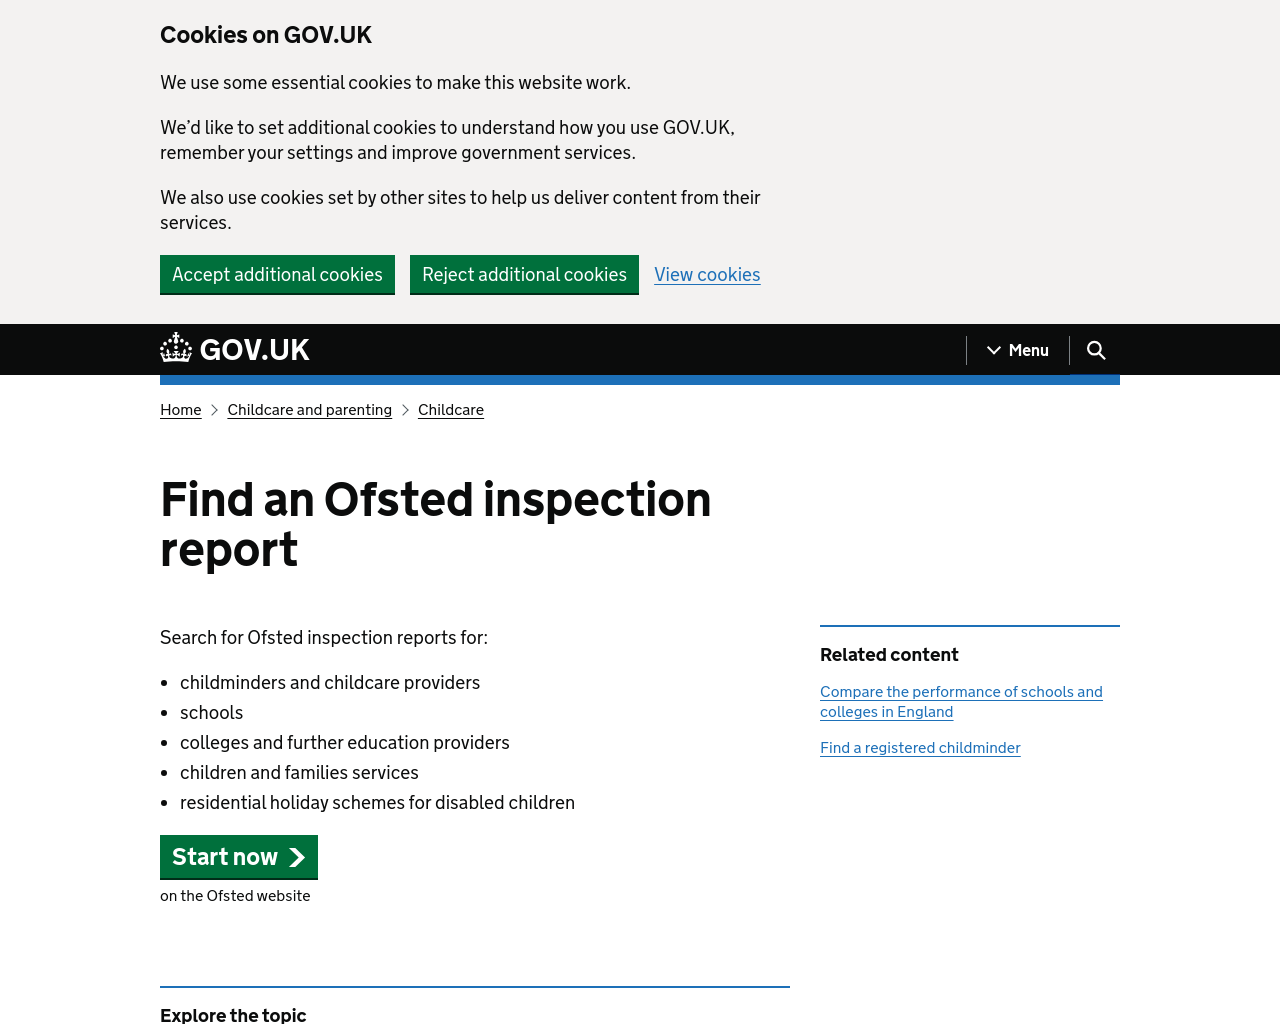 Find an Ofsted Report